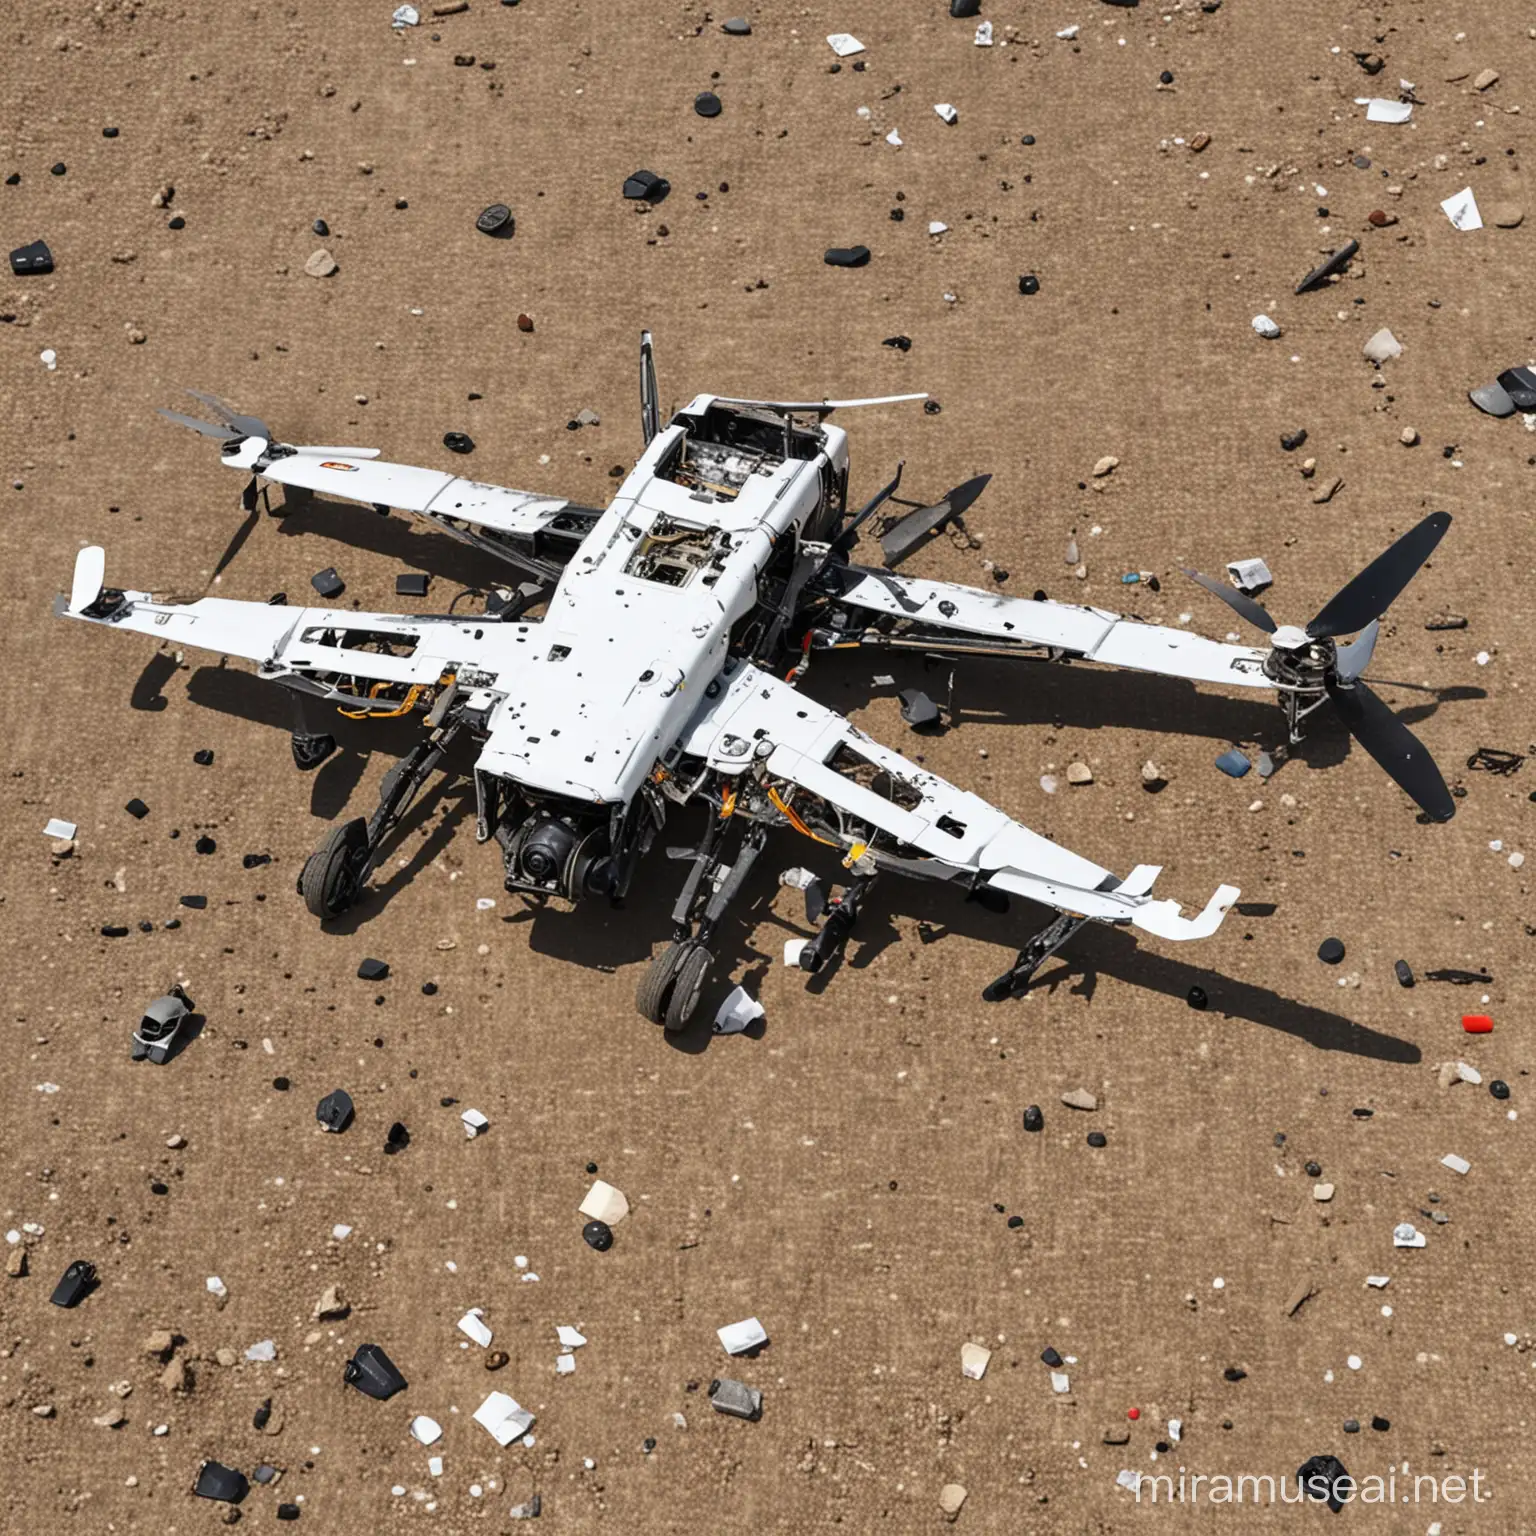 Aftermath of Civilian Drone Explosion Severe Damage and Scattered Debris